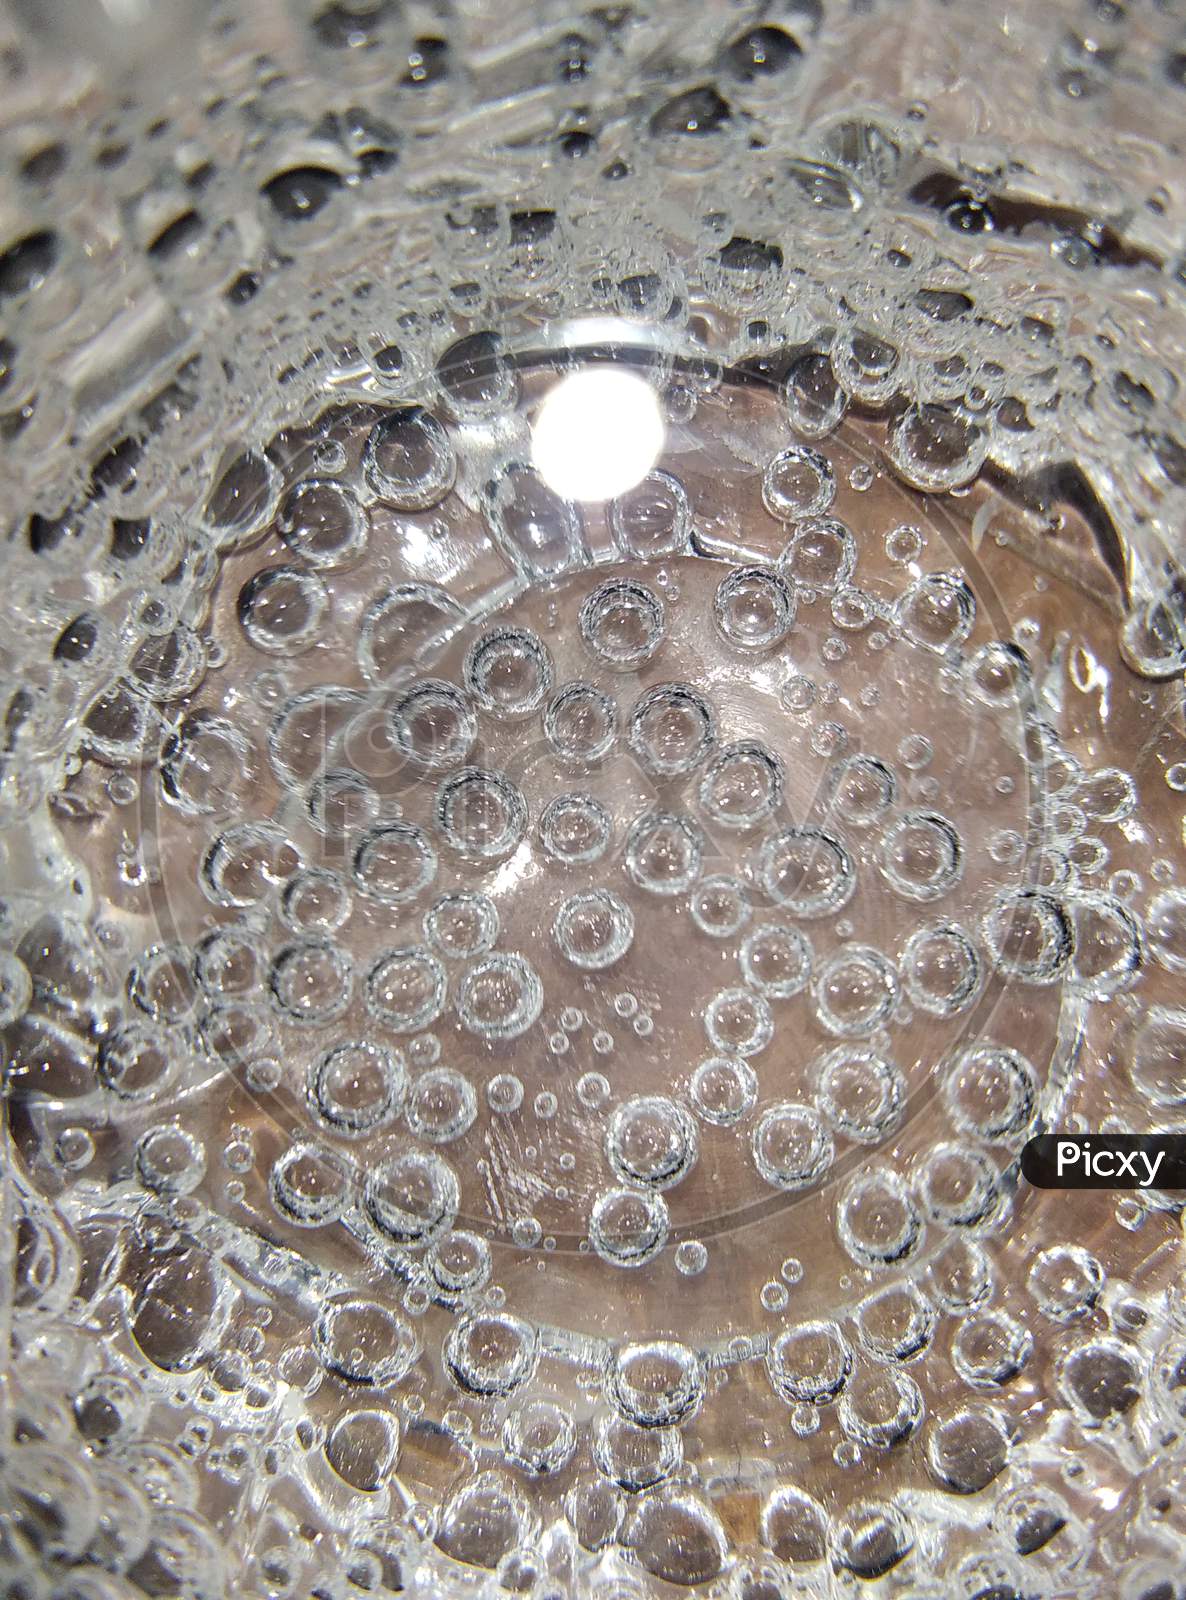 The bubbles looking like atoms...